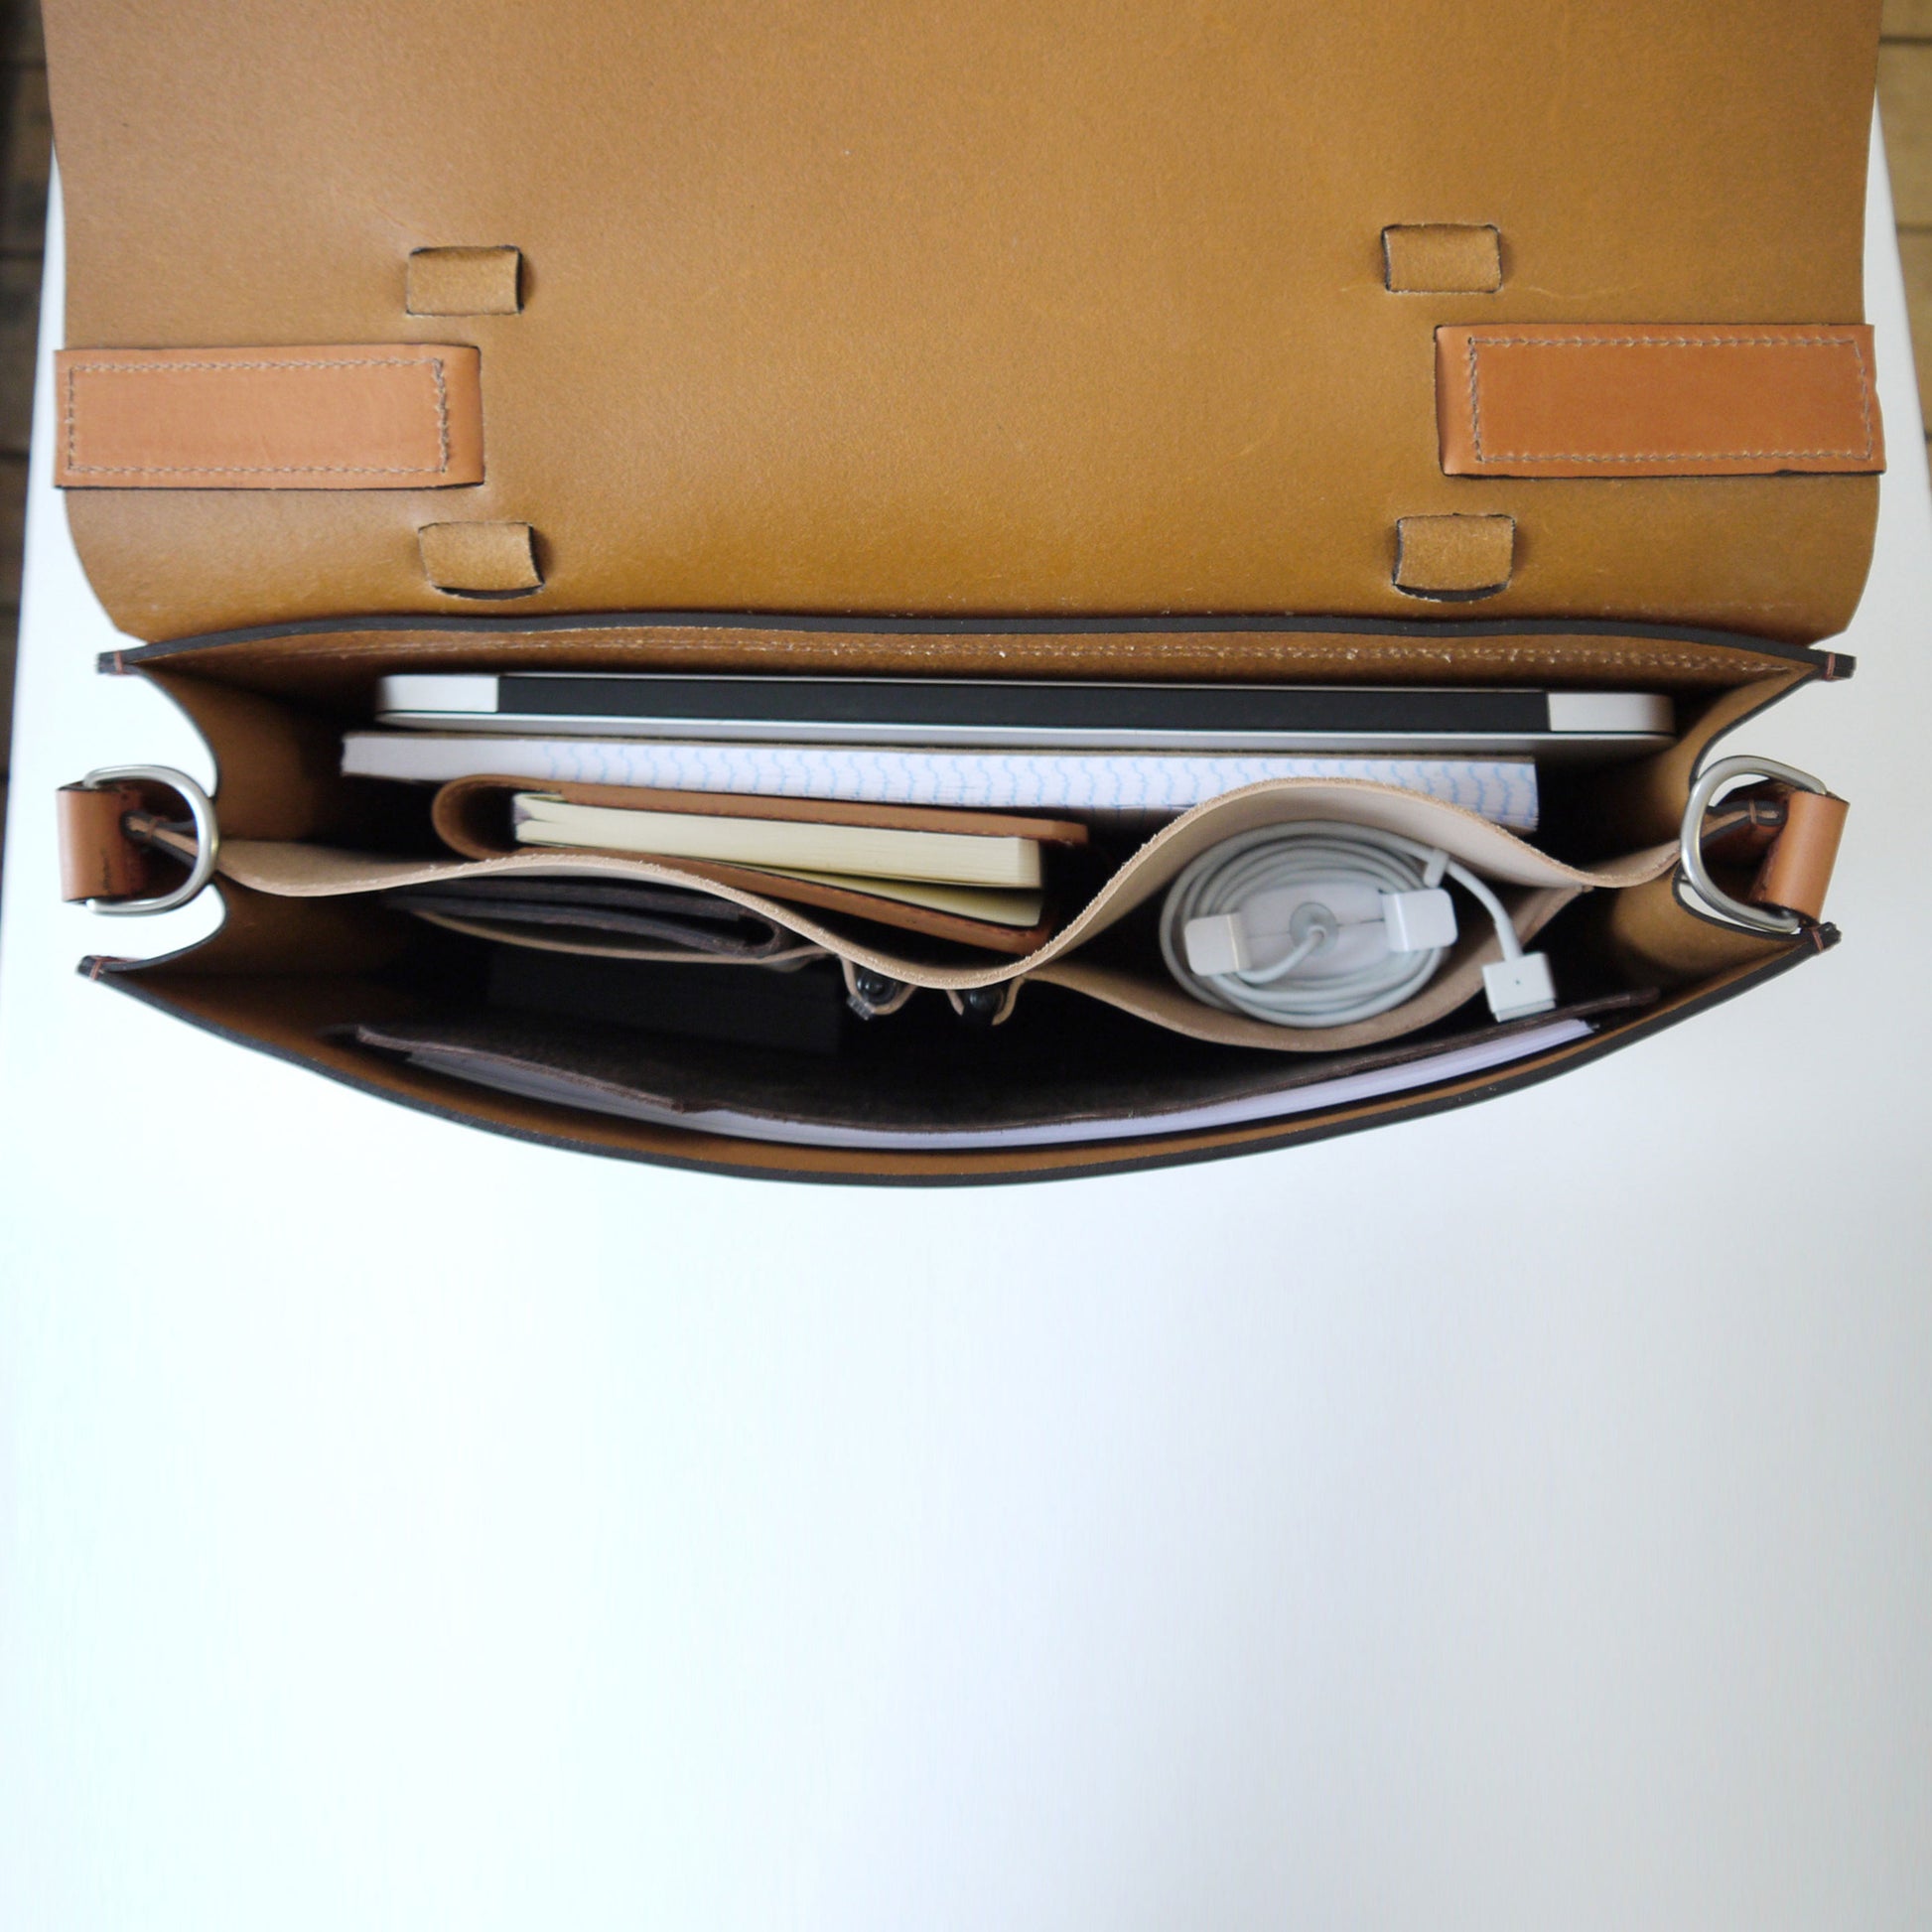 The Classic - Hand Made Leather Messenger Bag